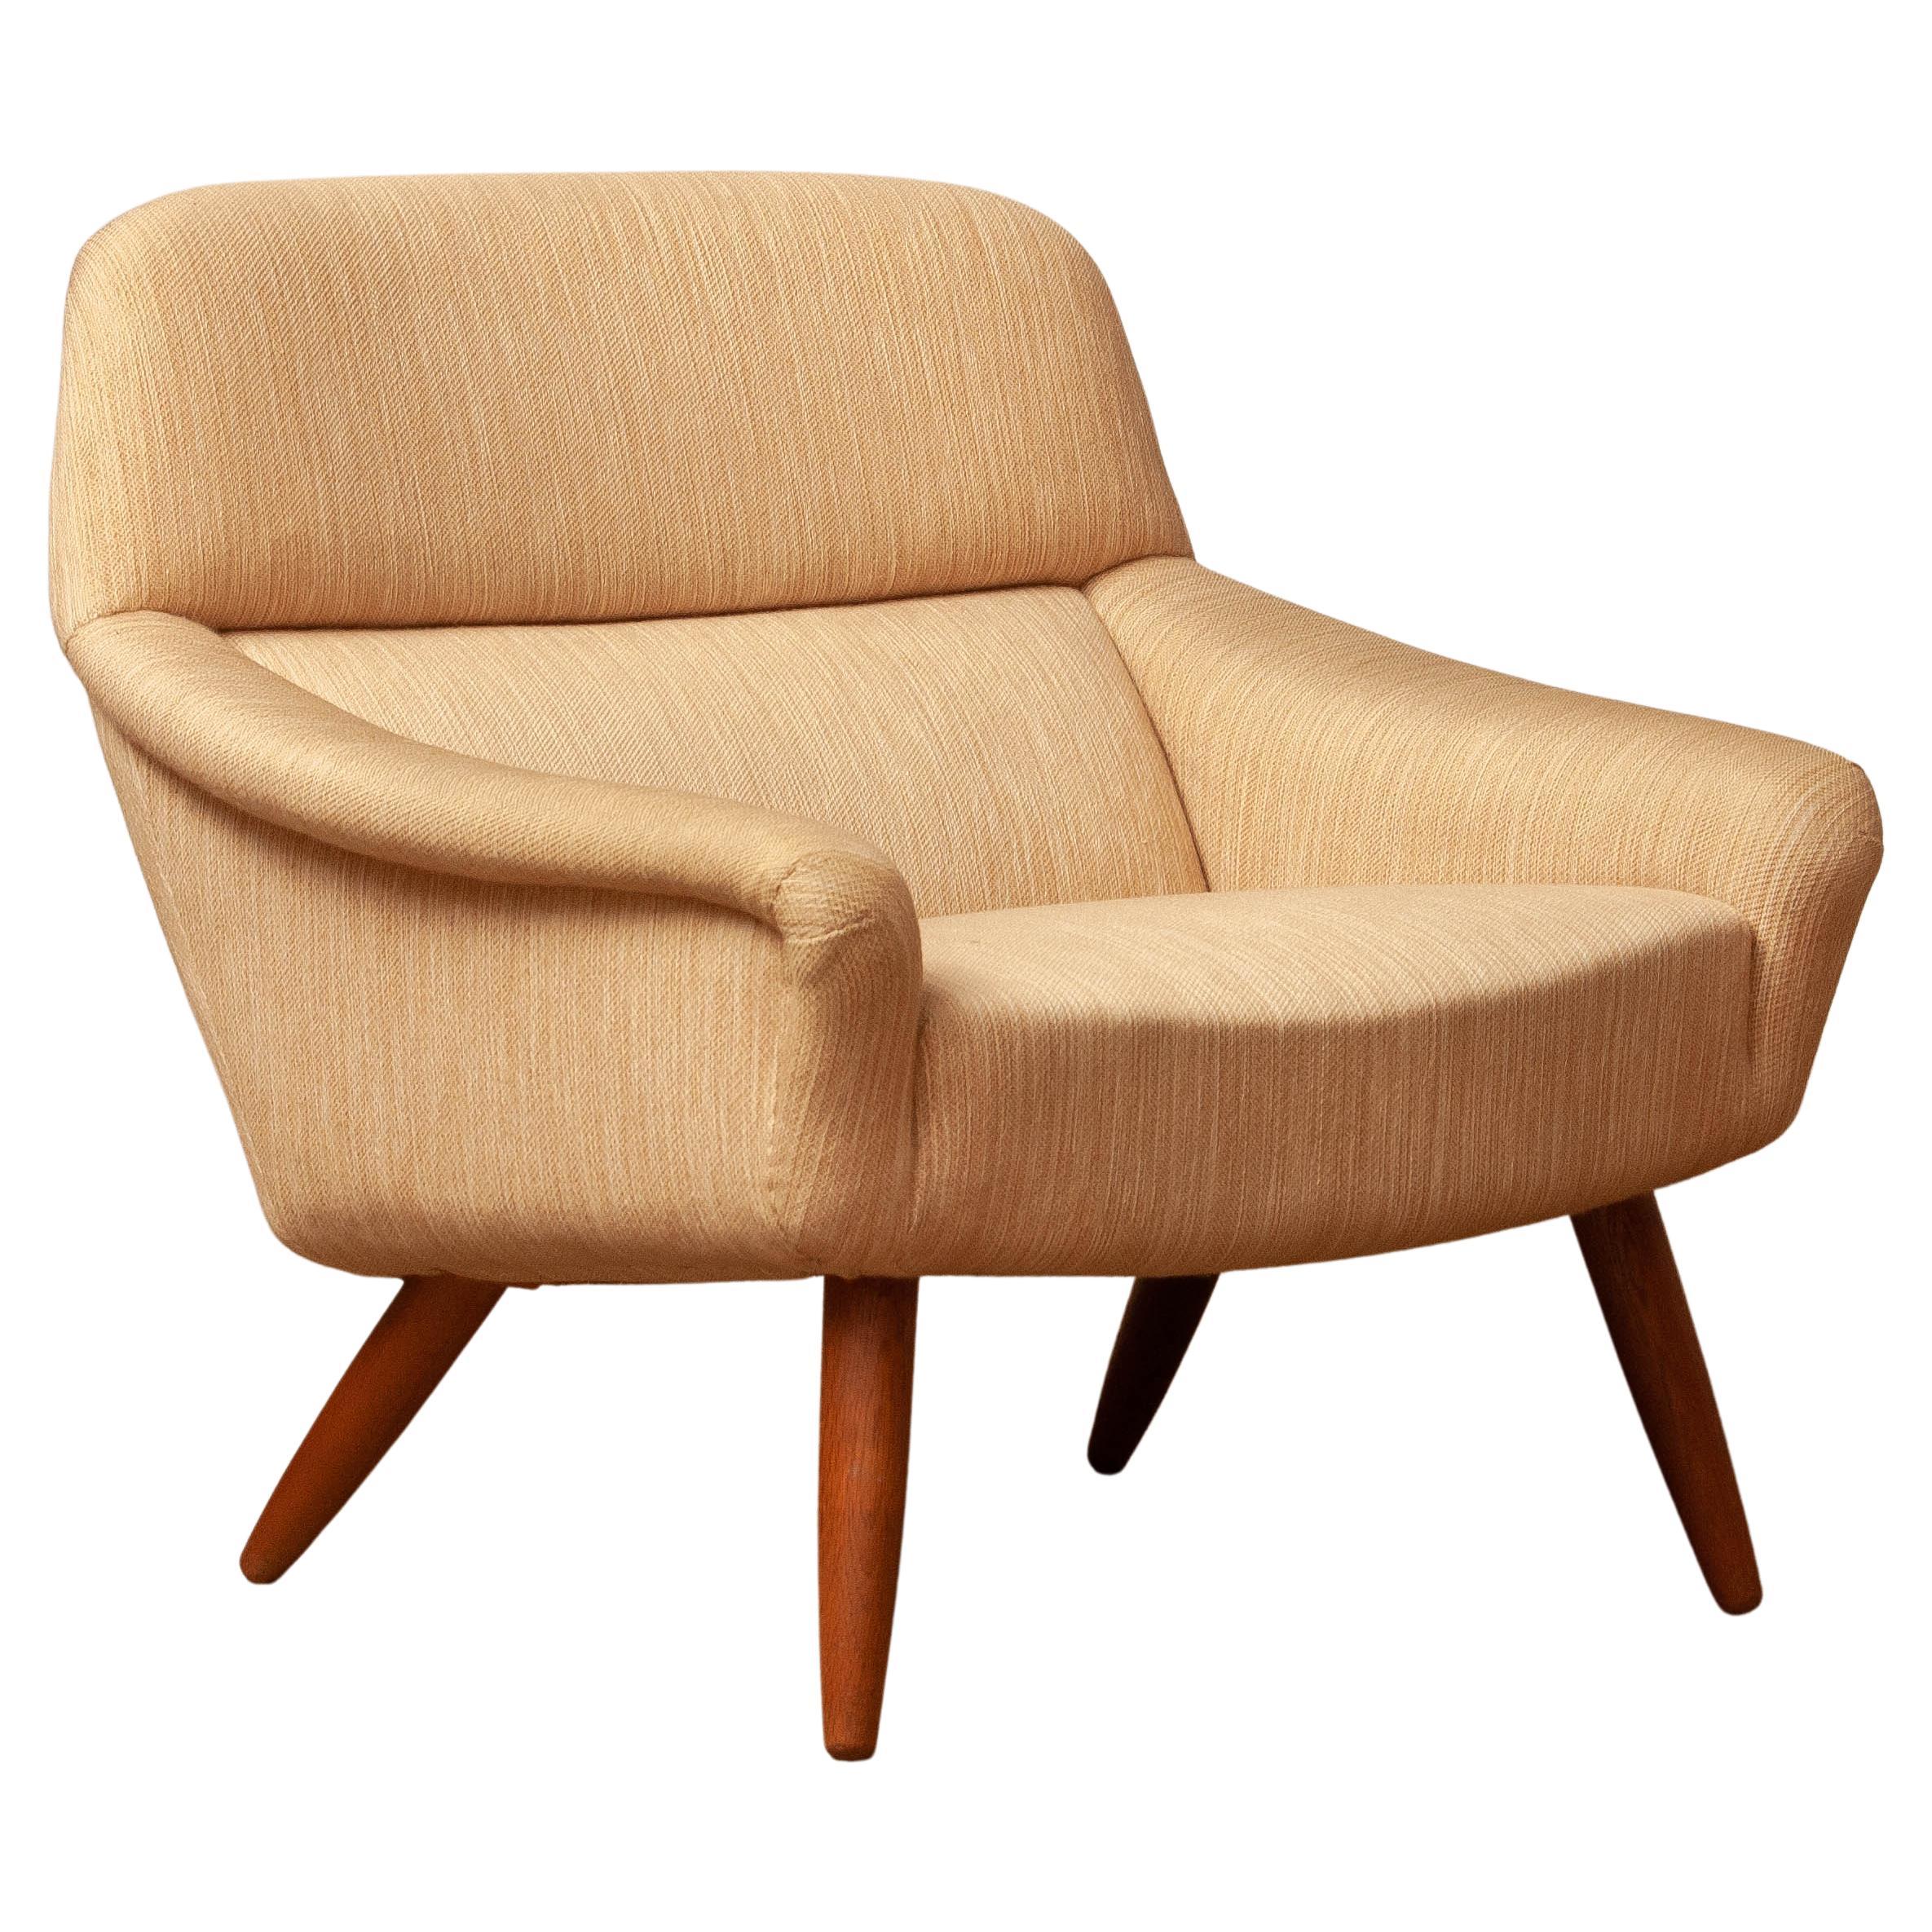 1960s Natural Wool and Oak Lounge Chair by Leif Hansen for Kronen in Denmark For Sale